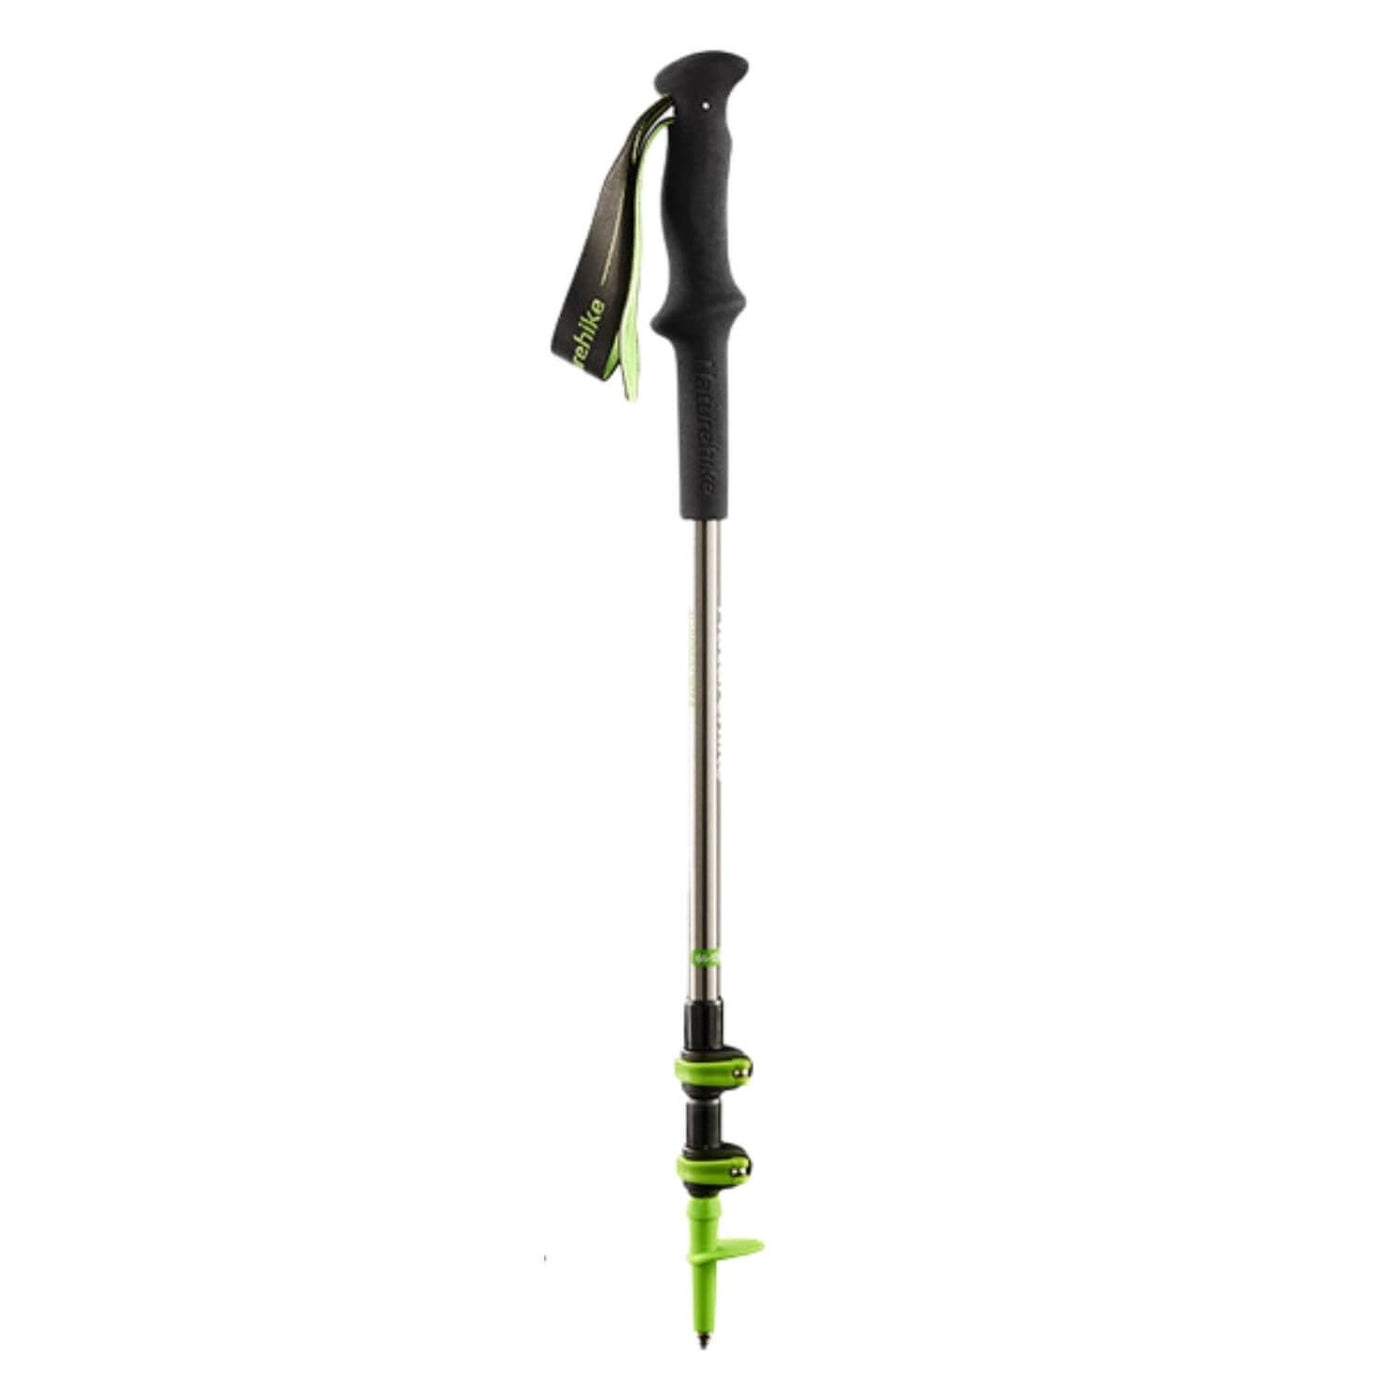 ST06 carbon and aluminum walking stick